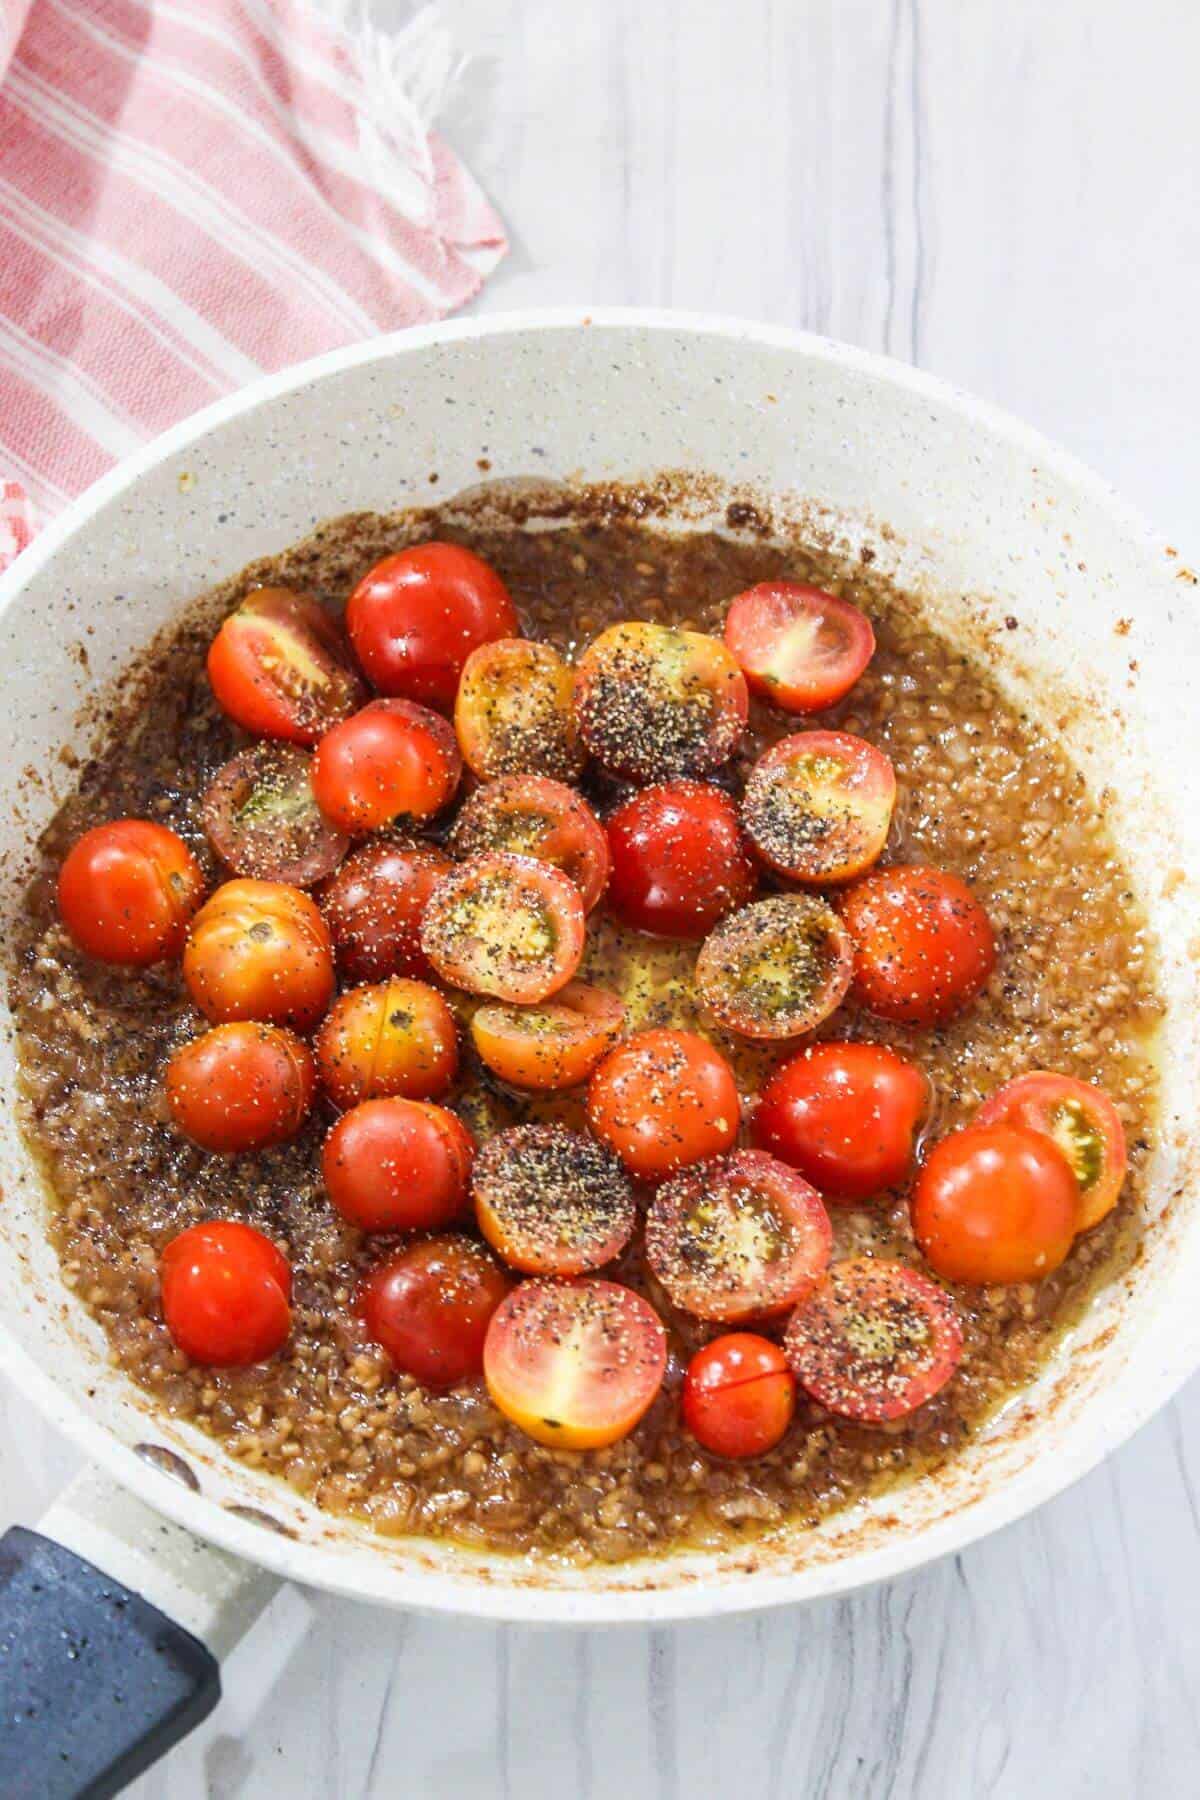 A frying pan filled with tomatoes and spices.